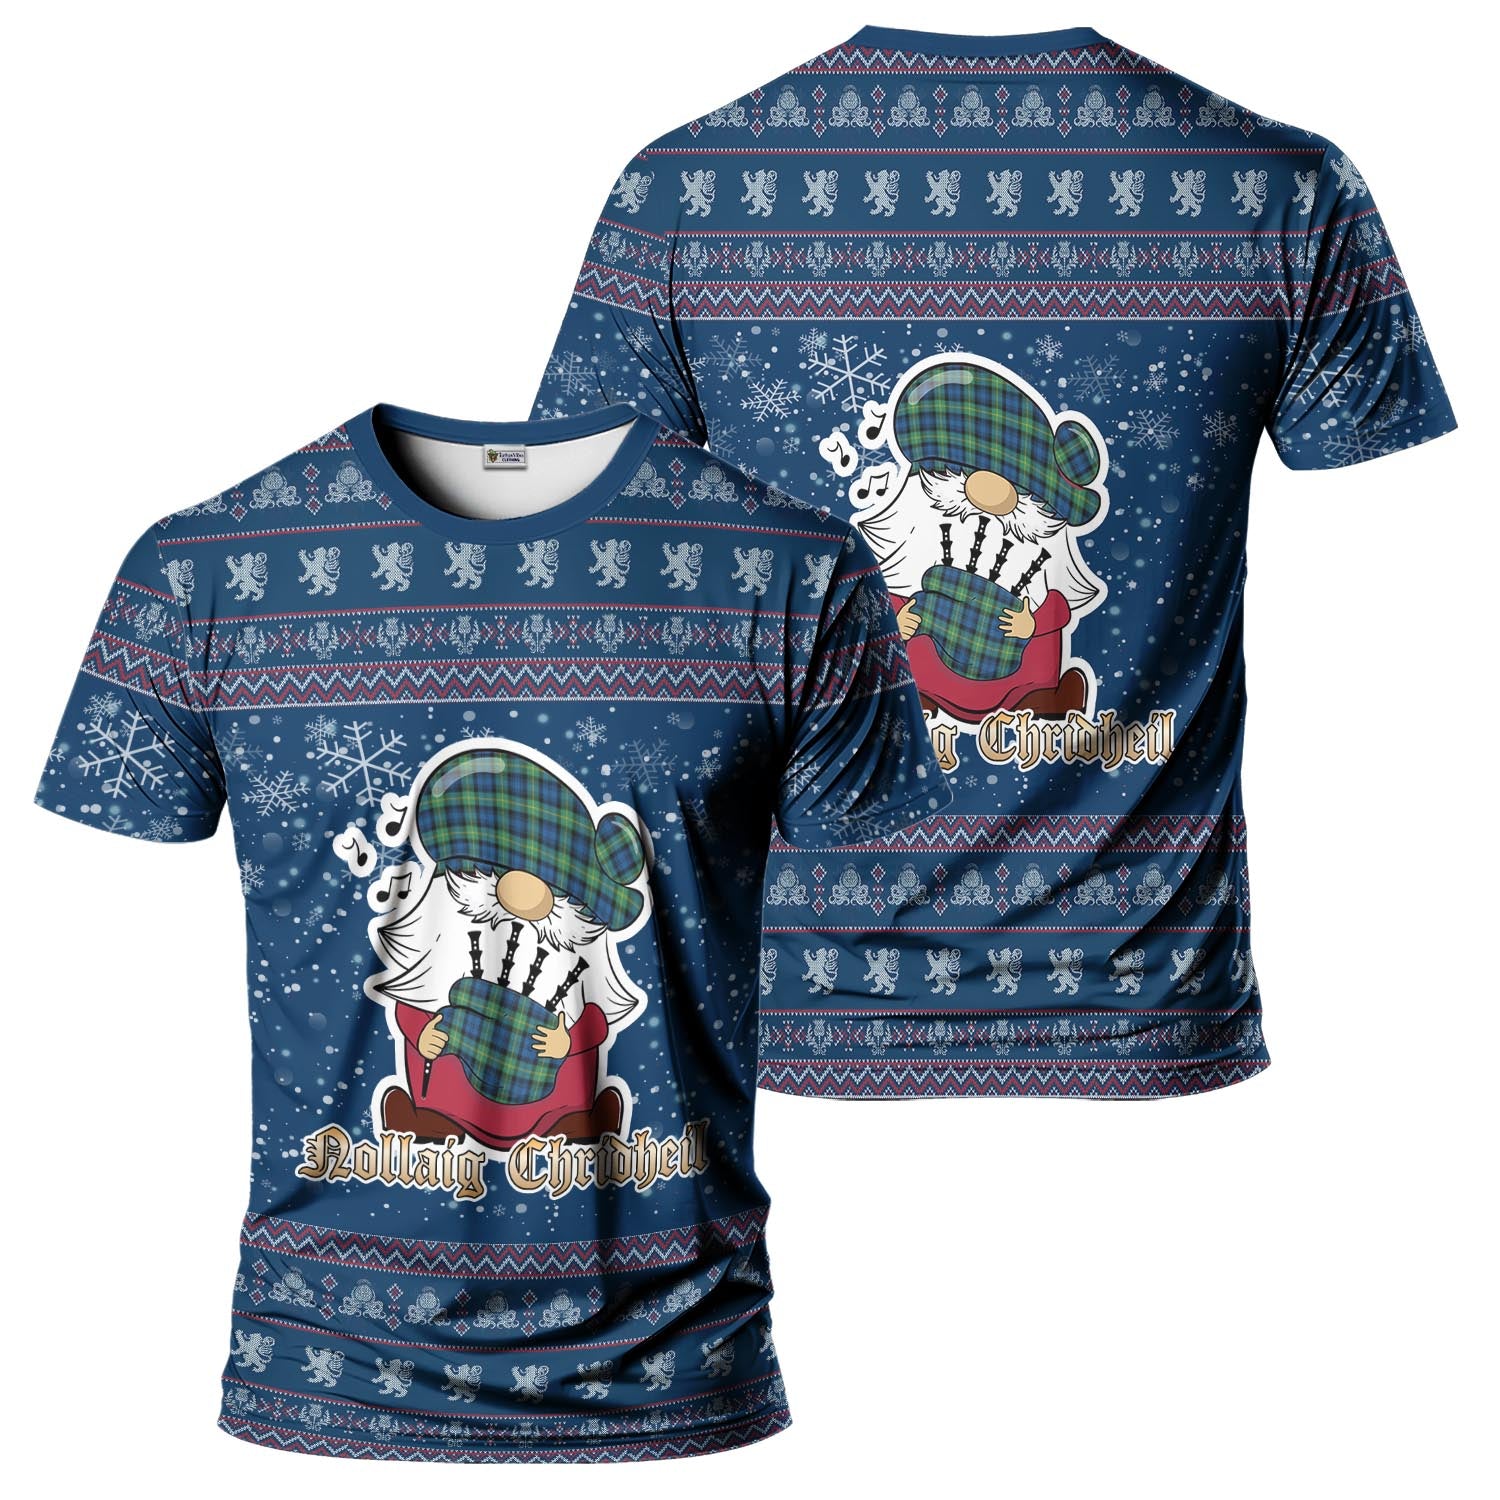 Gordon Ancient Clan Christmas Family T-Shirt with Funny Gnome Playing Bagpipes Kid's Shirt Blue - Tartanvibesclothing